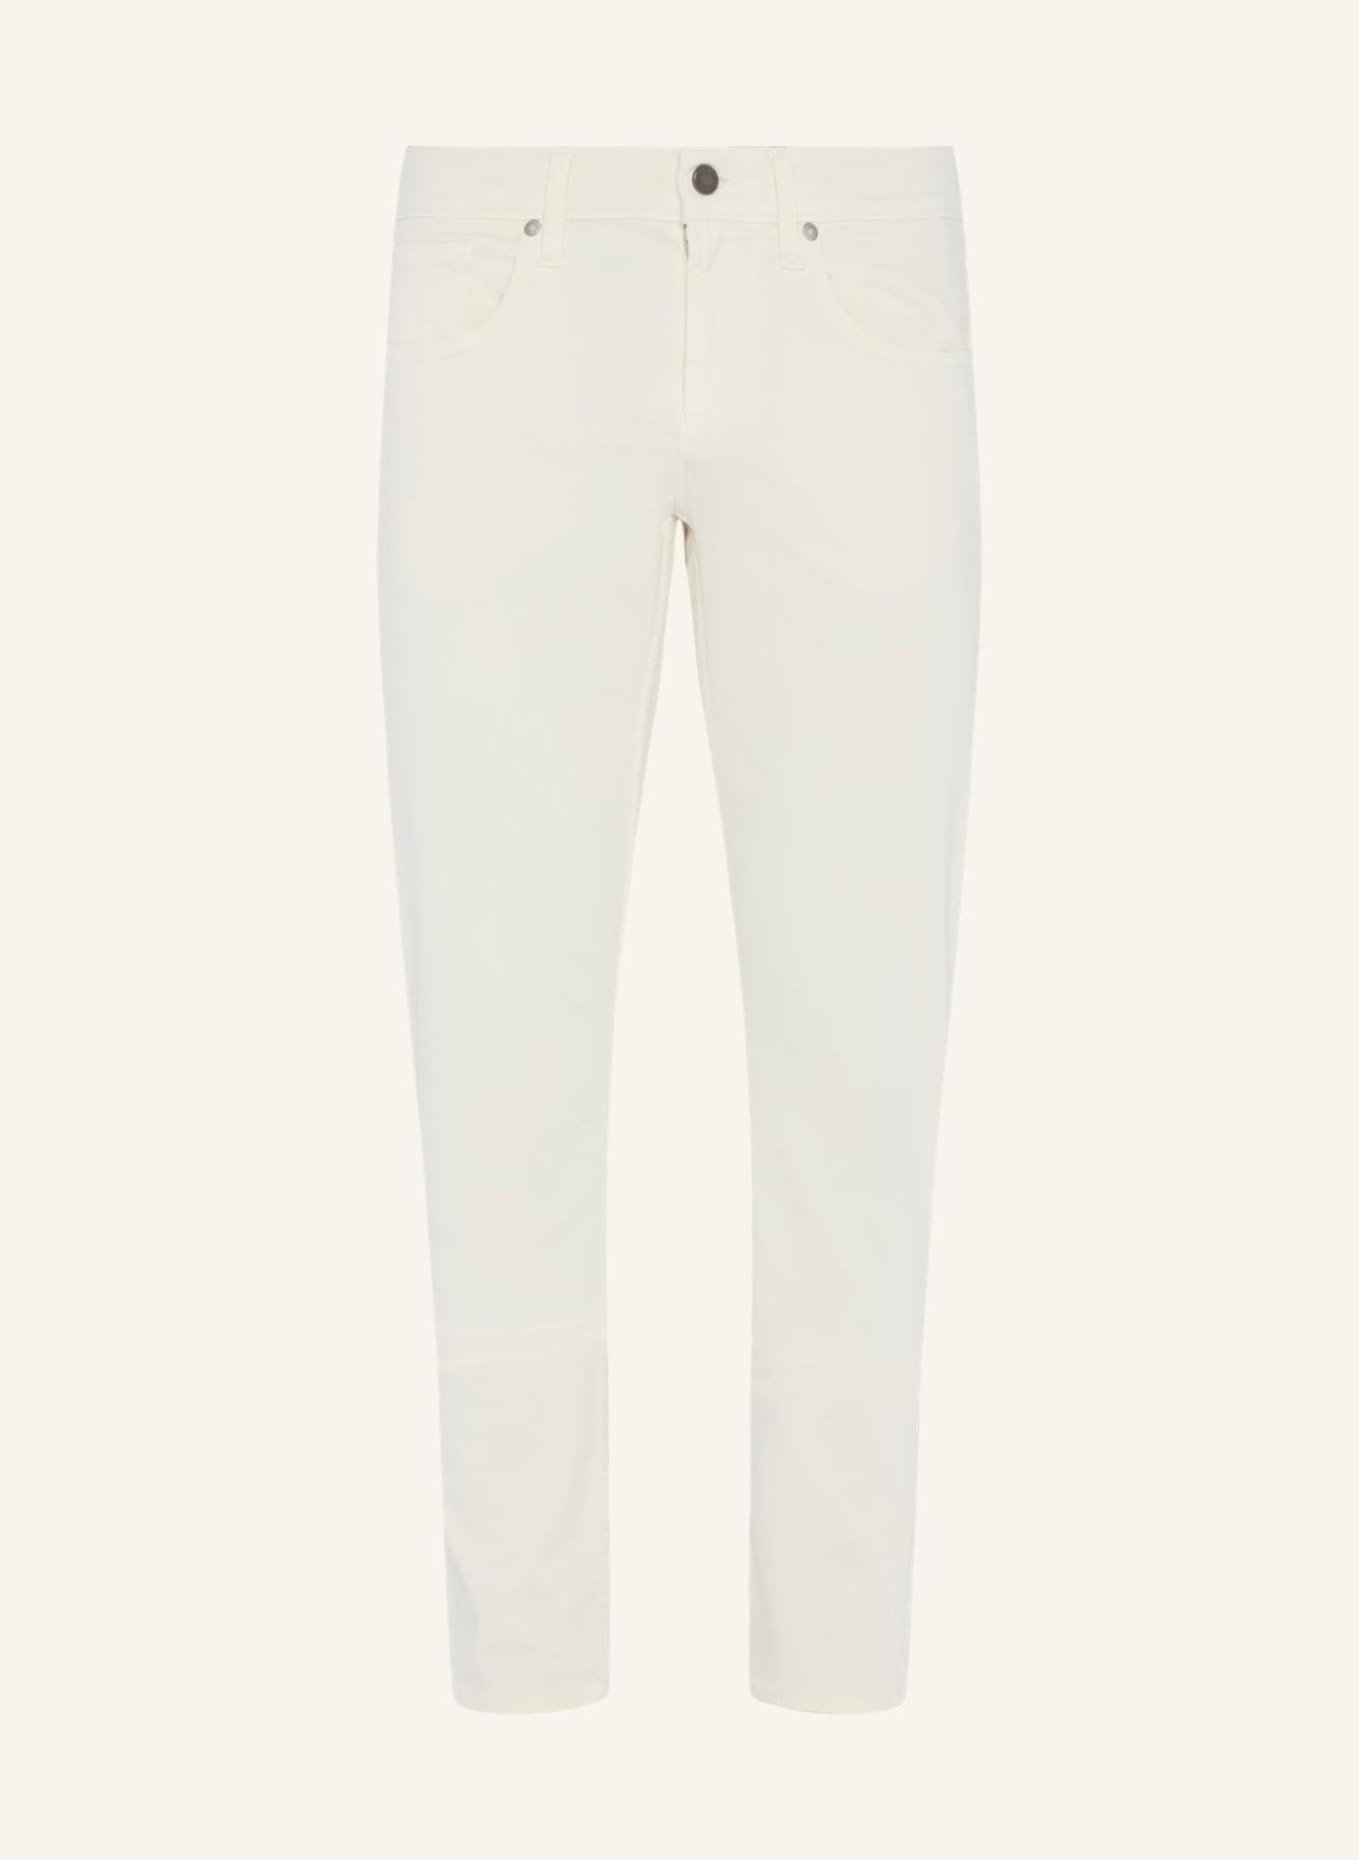 7 for all mankind Pants SLIMMY Slim fit, Farbe: WEISS (Bild 1)